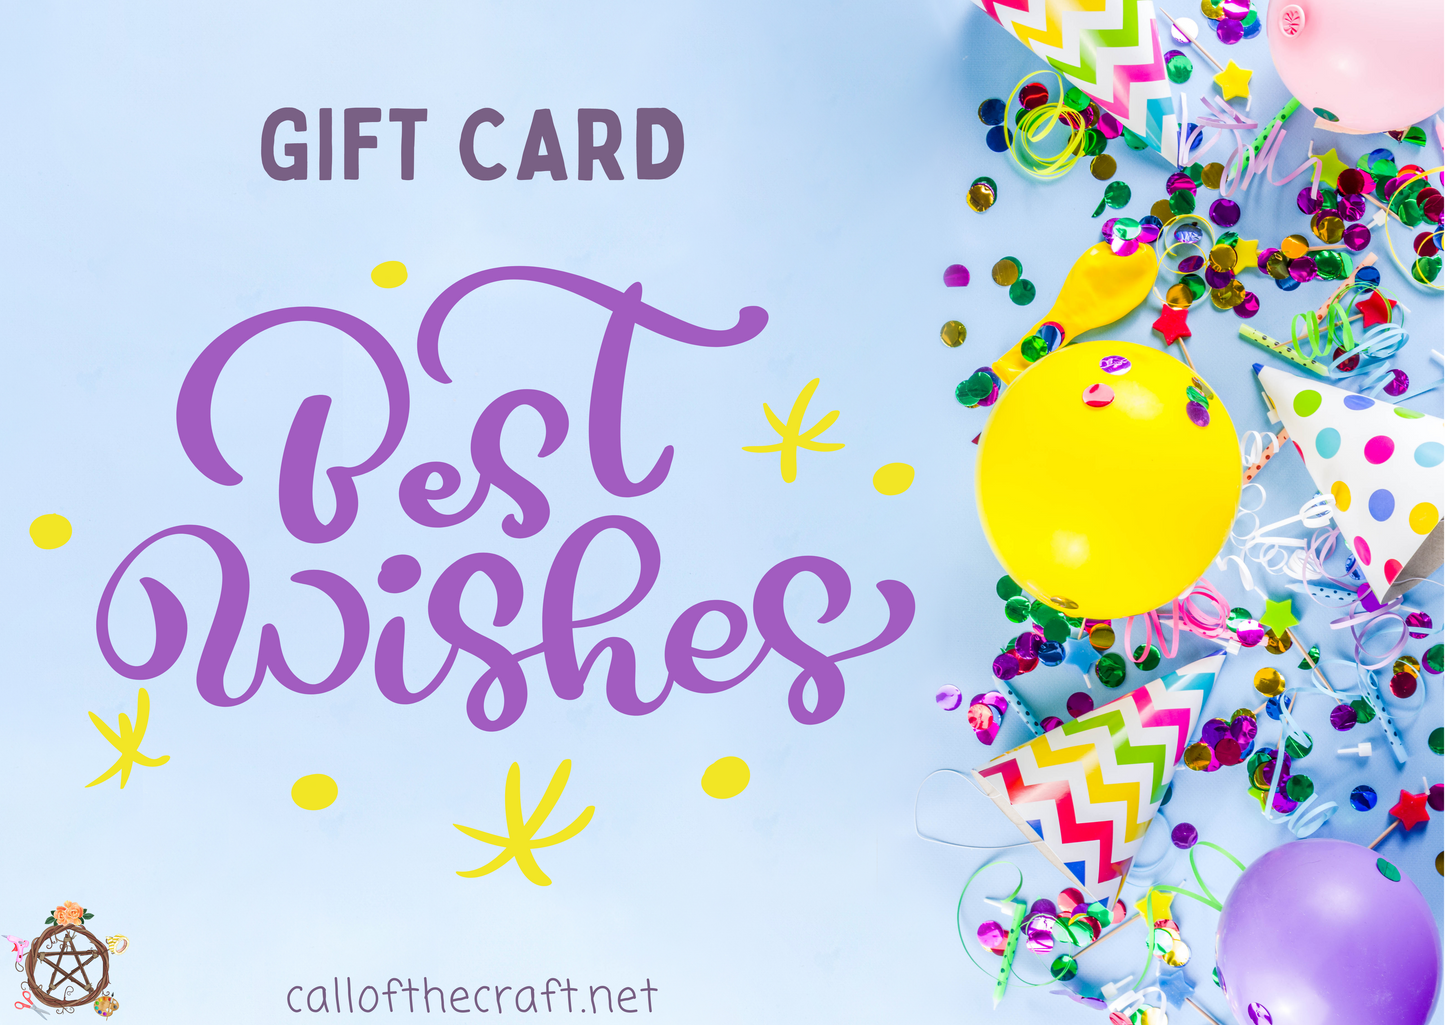 Best Wishes Gift Card - The Call of the Craft